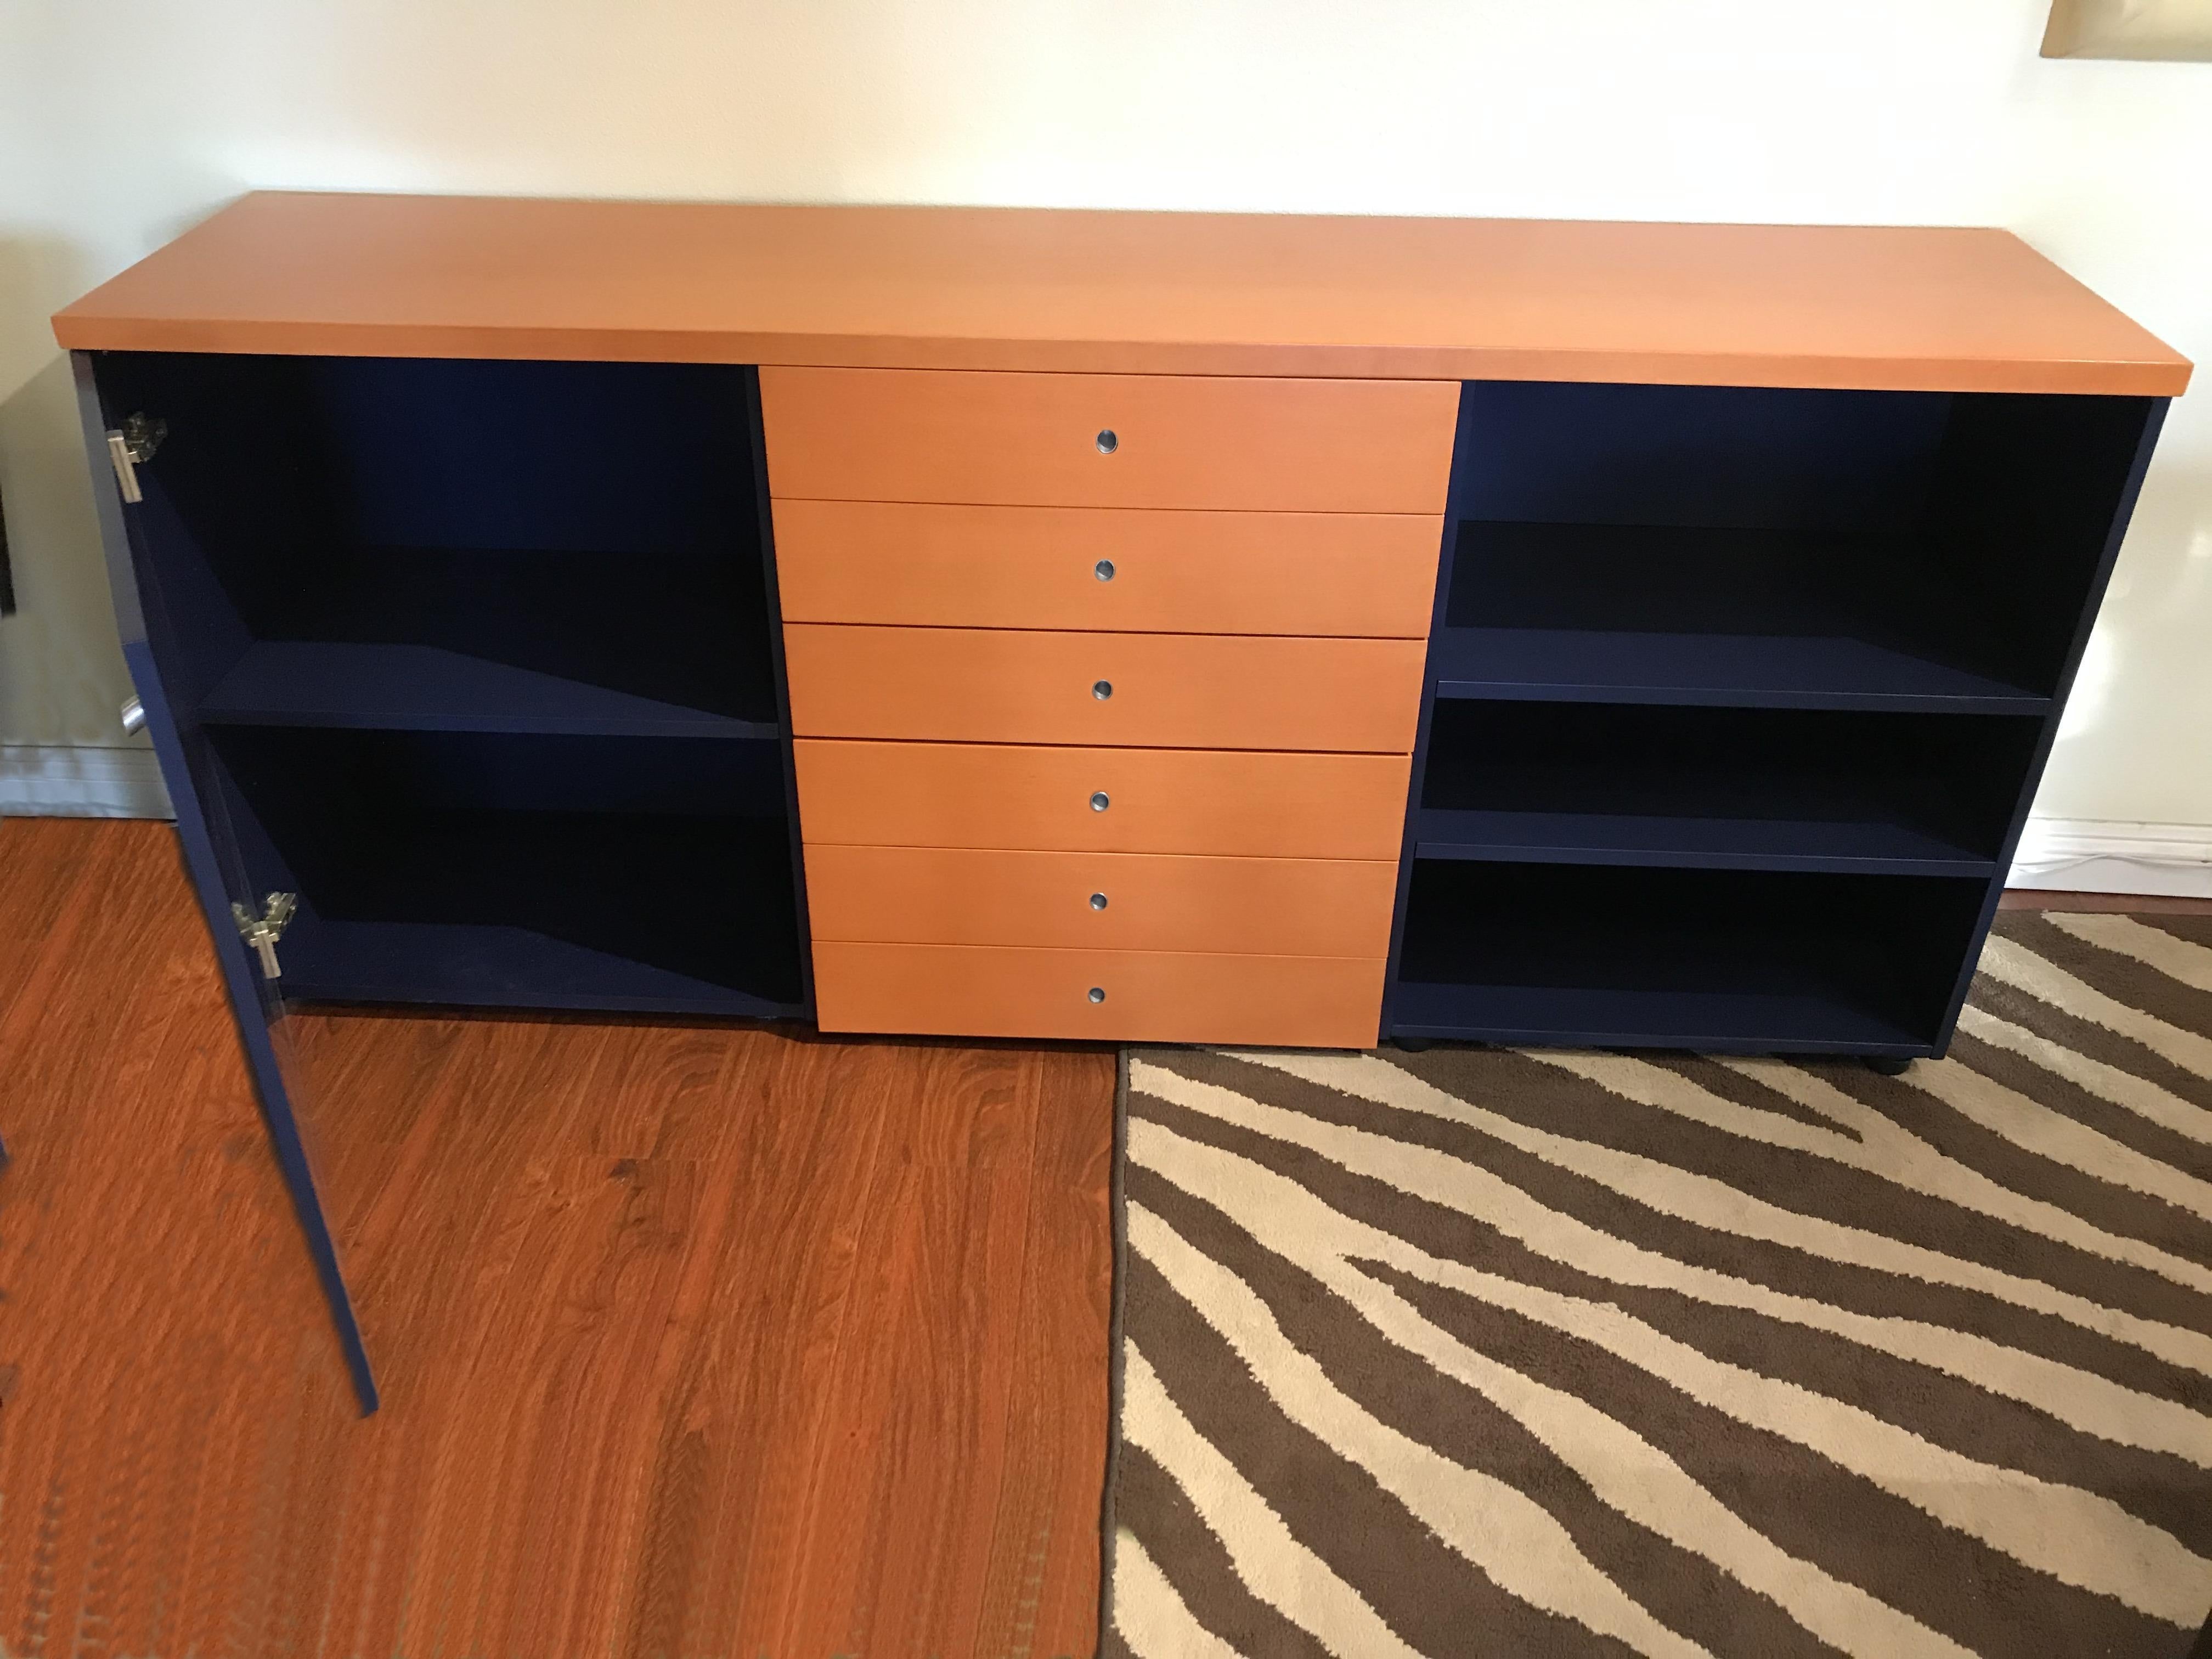 A two-toned buffet in terracotta orange and dark blue stained wood, with brushed steel accented pulls. 
It features six center drawers. The left side the door opens on 1 adjustable shelf and the right side features a little bookcase with 2